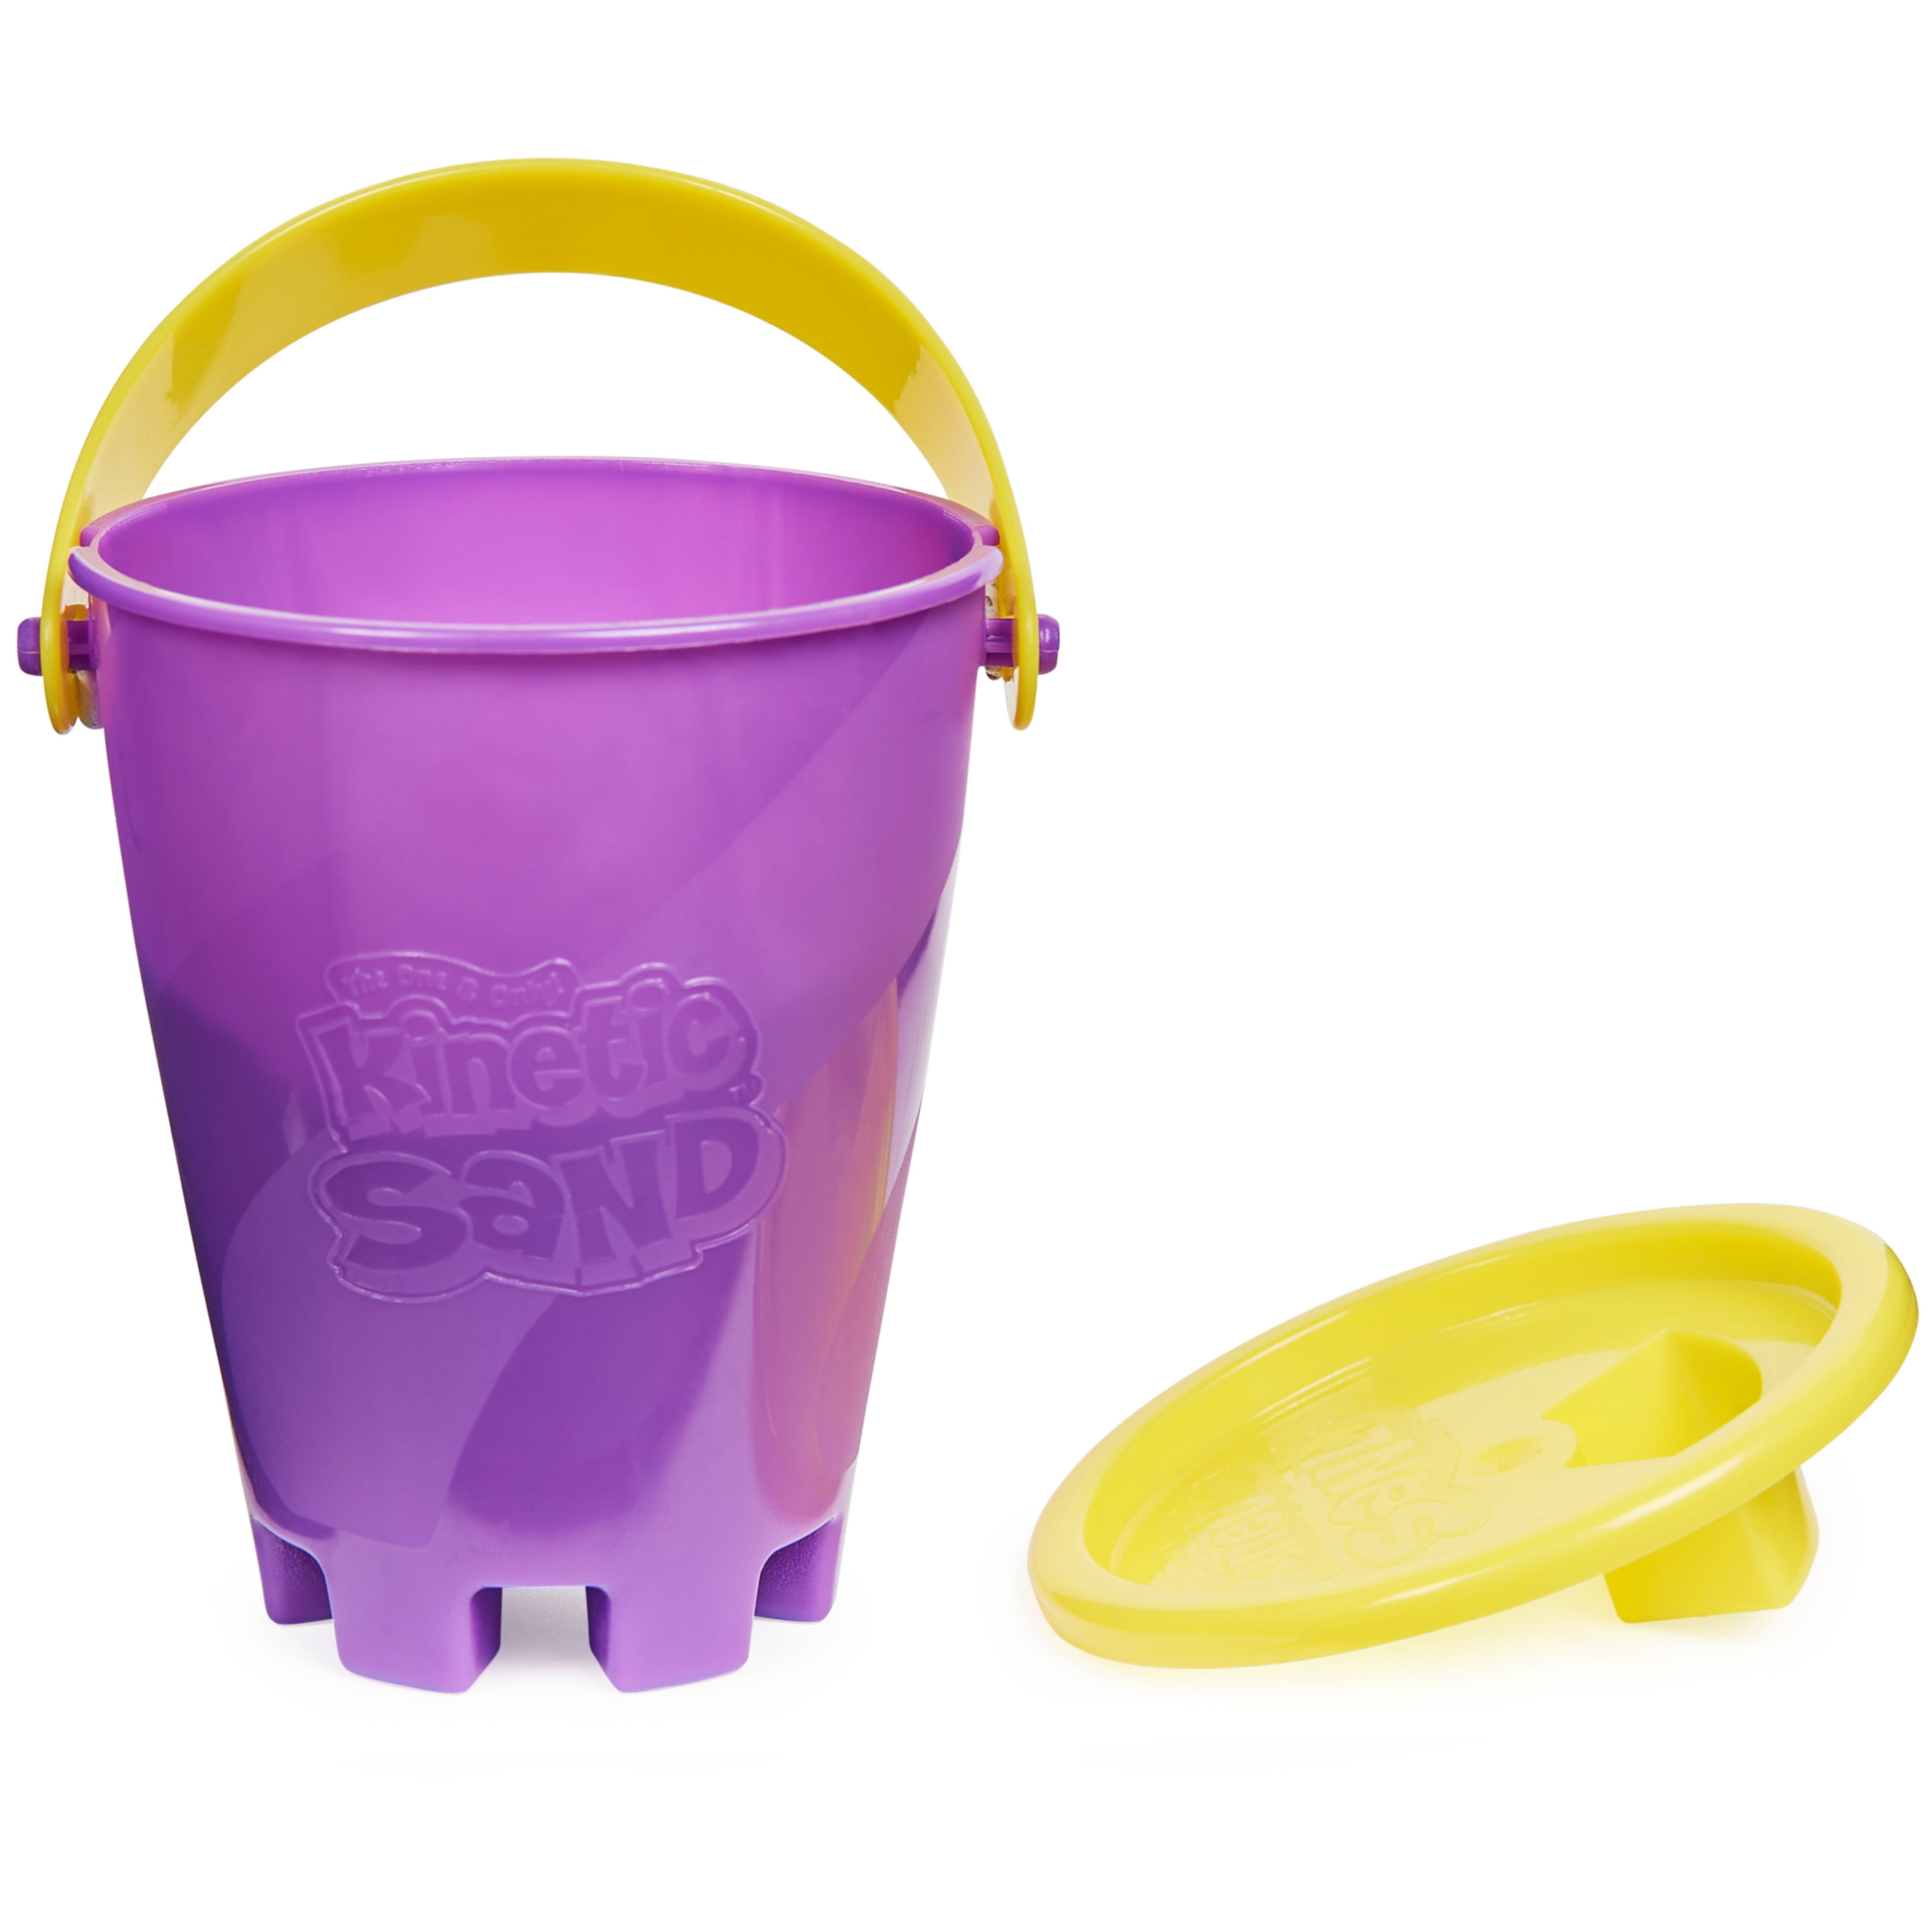 Faxco 5 Pack 6' ' 1.5 L Plastic Small Bucket,Small Sand Pail Beach Toy,Beach Pails for Sand Molds at The Sandbox(5 Colors)